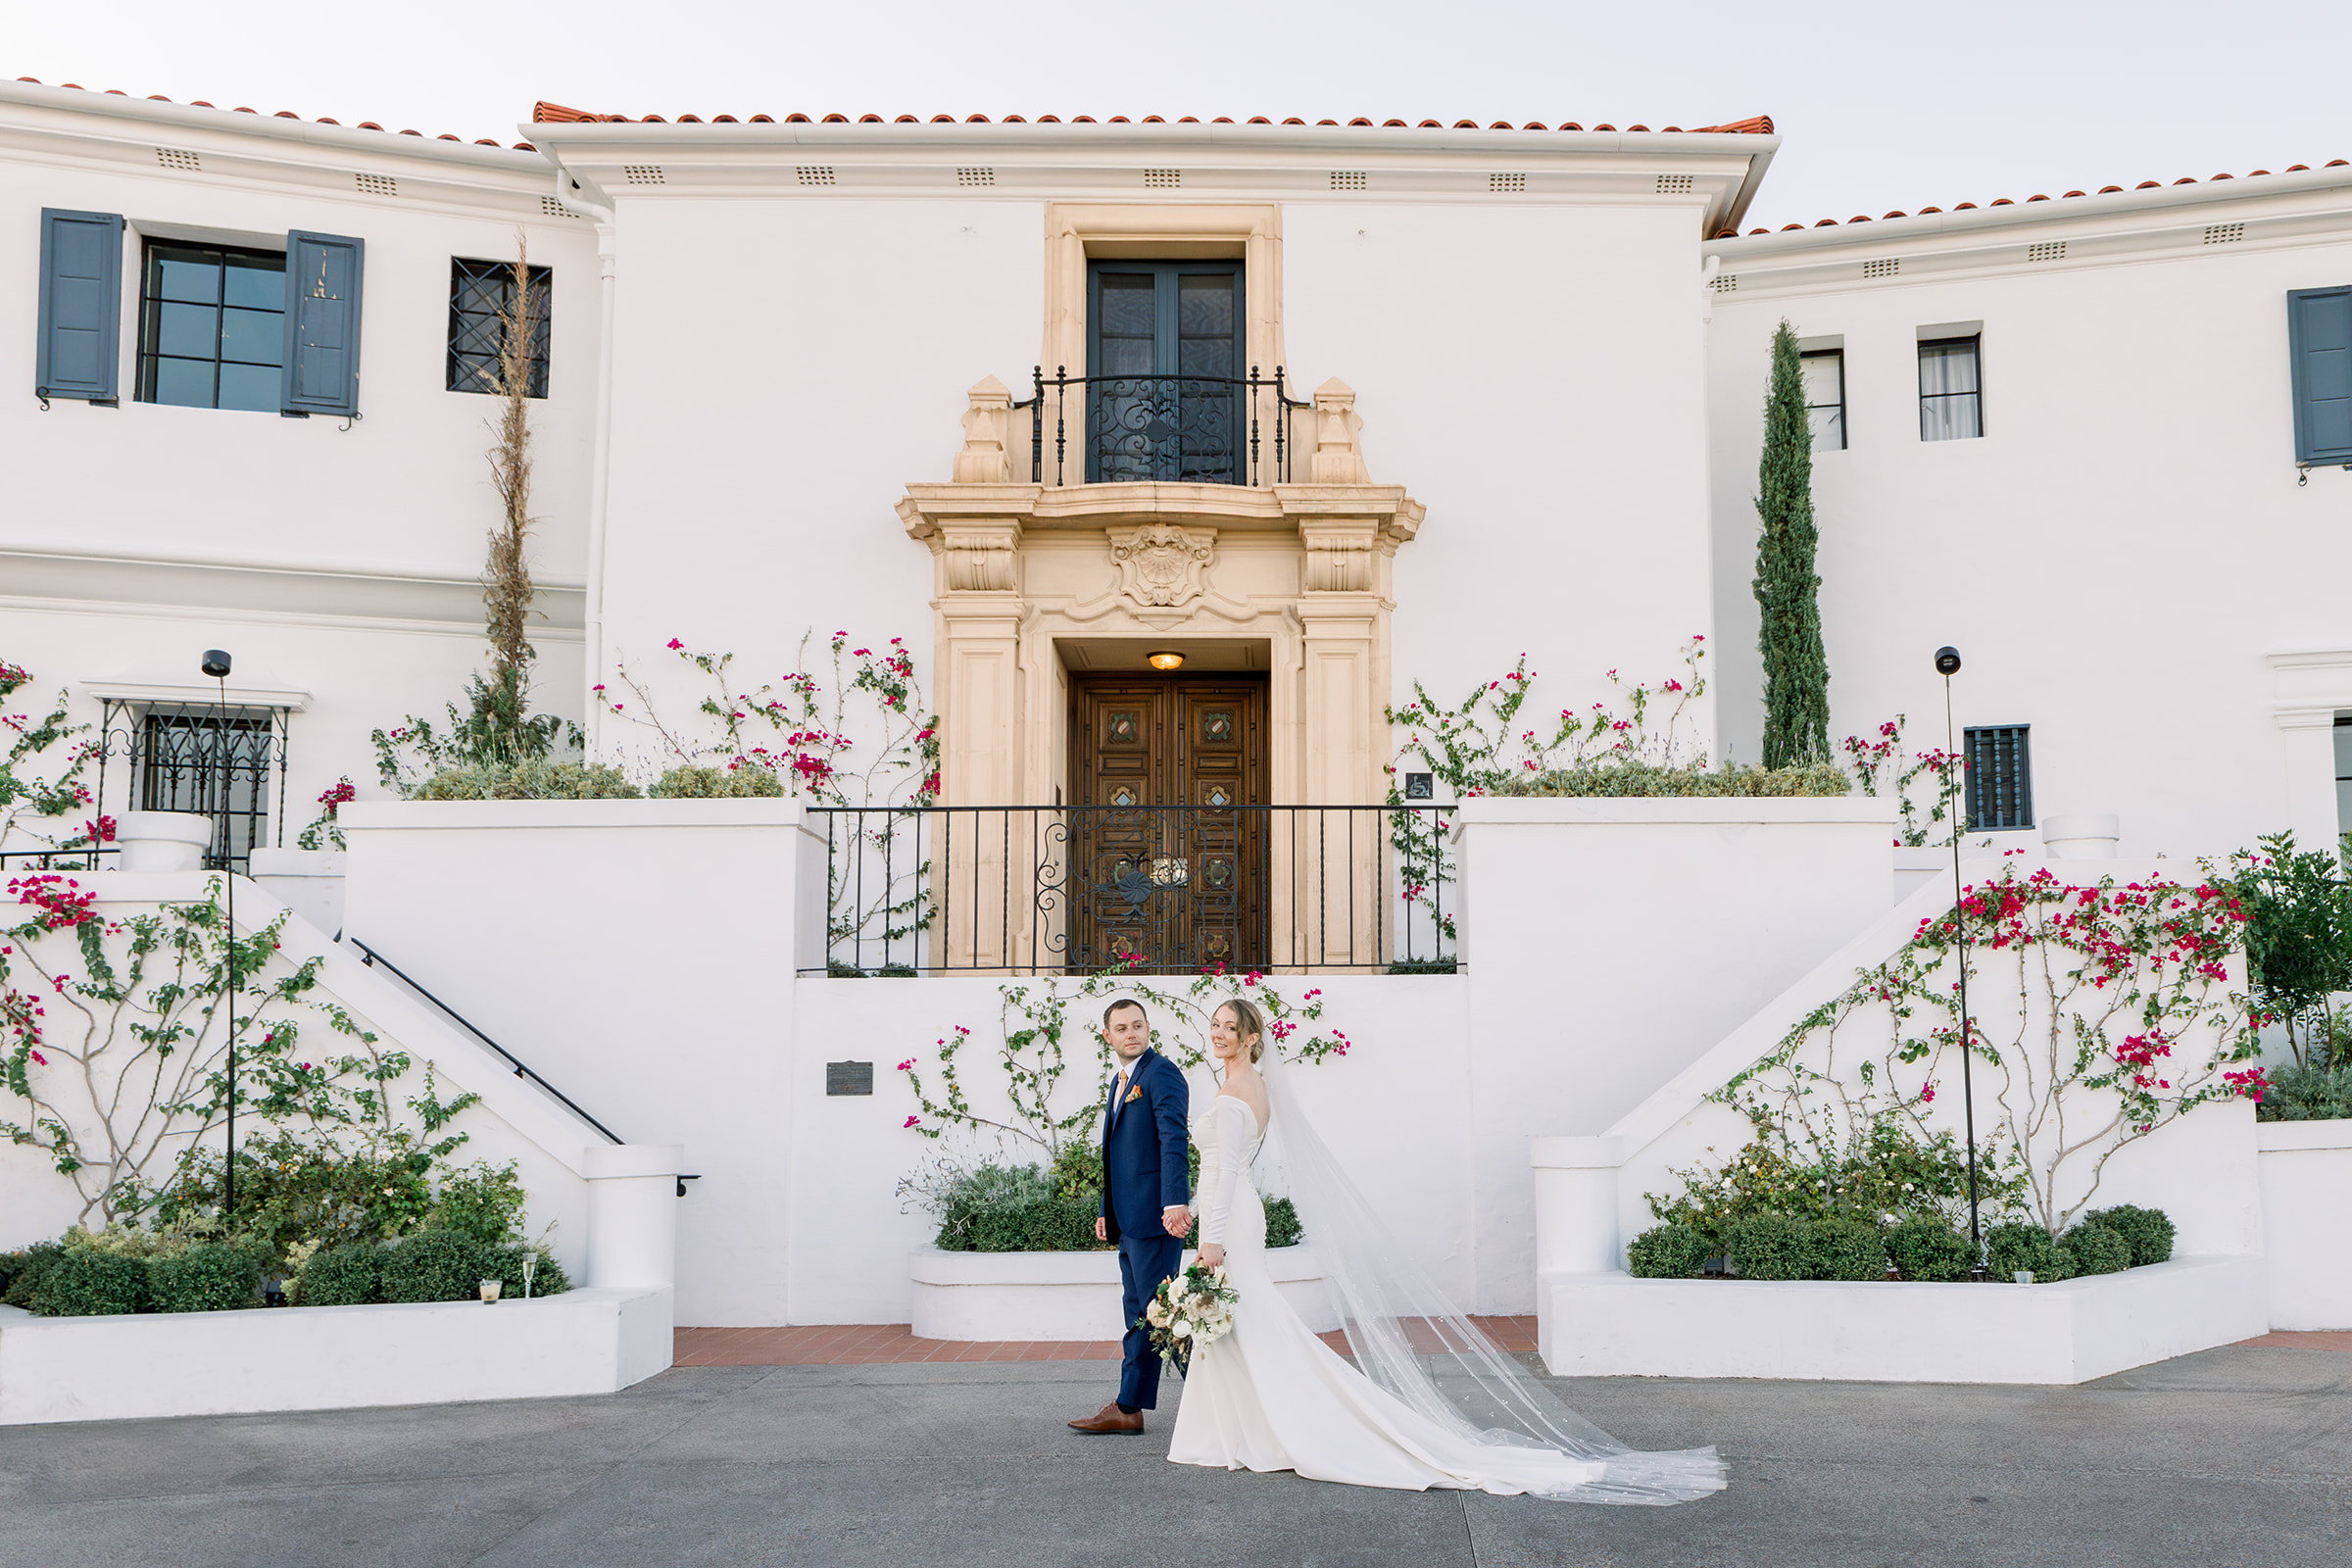 Historic Wrigley Mansion wedding in the heart of Phoenix